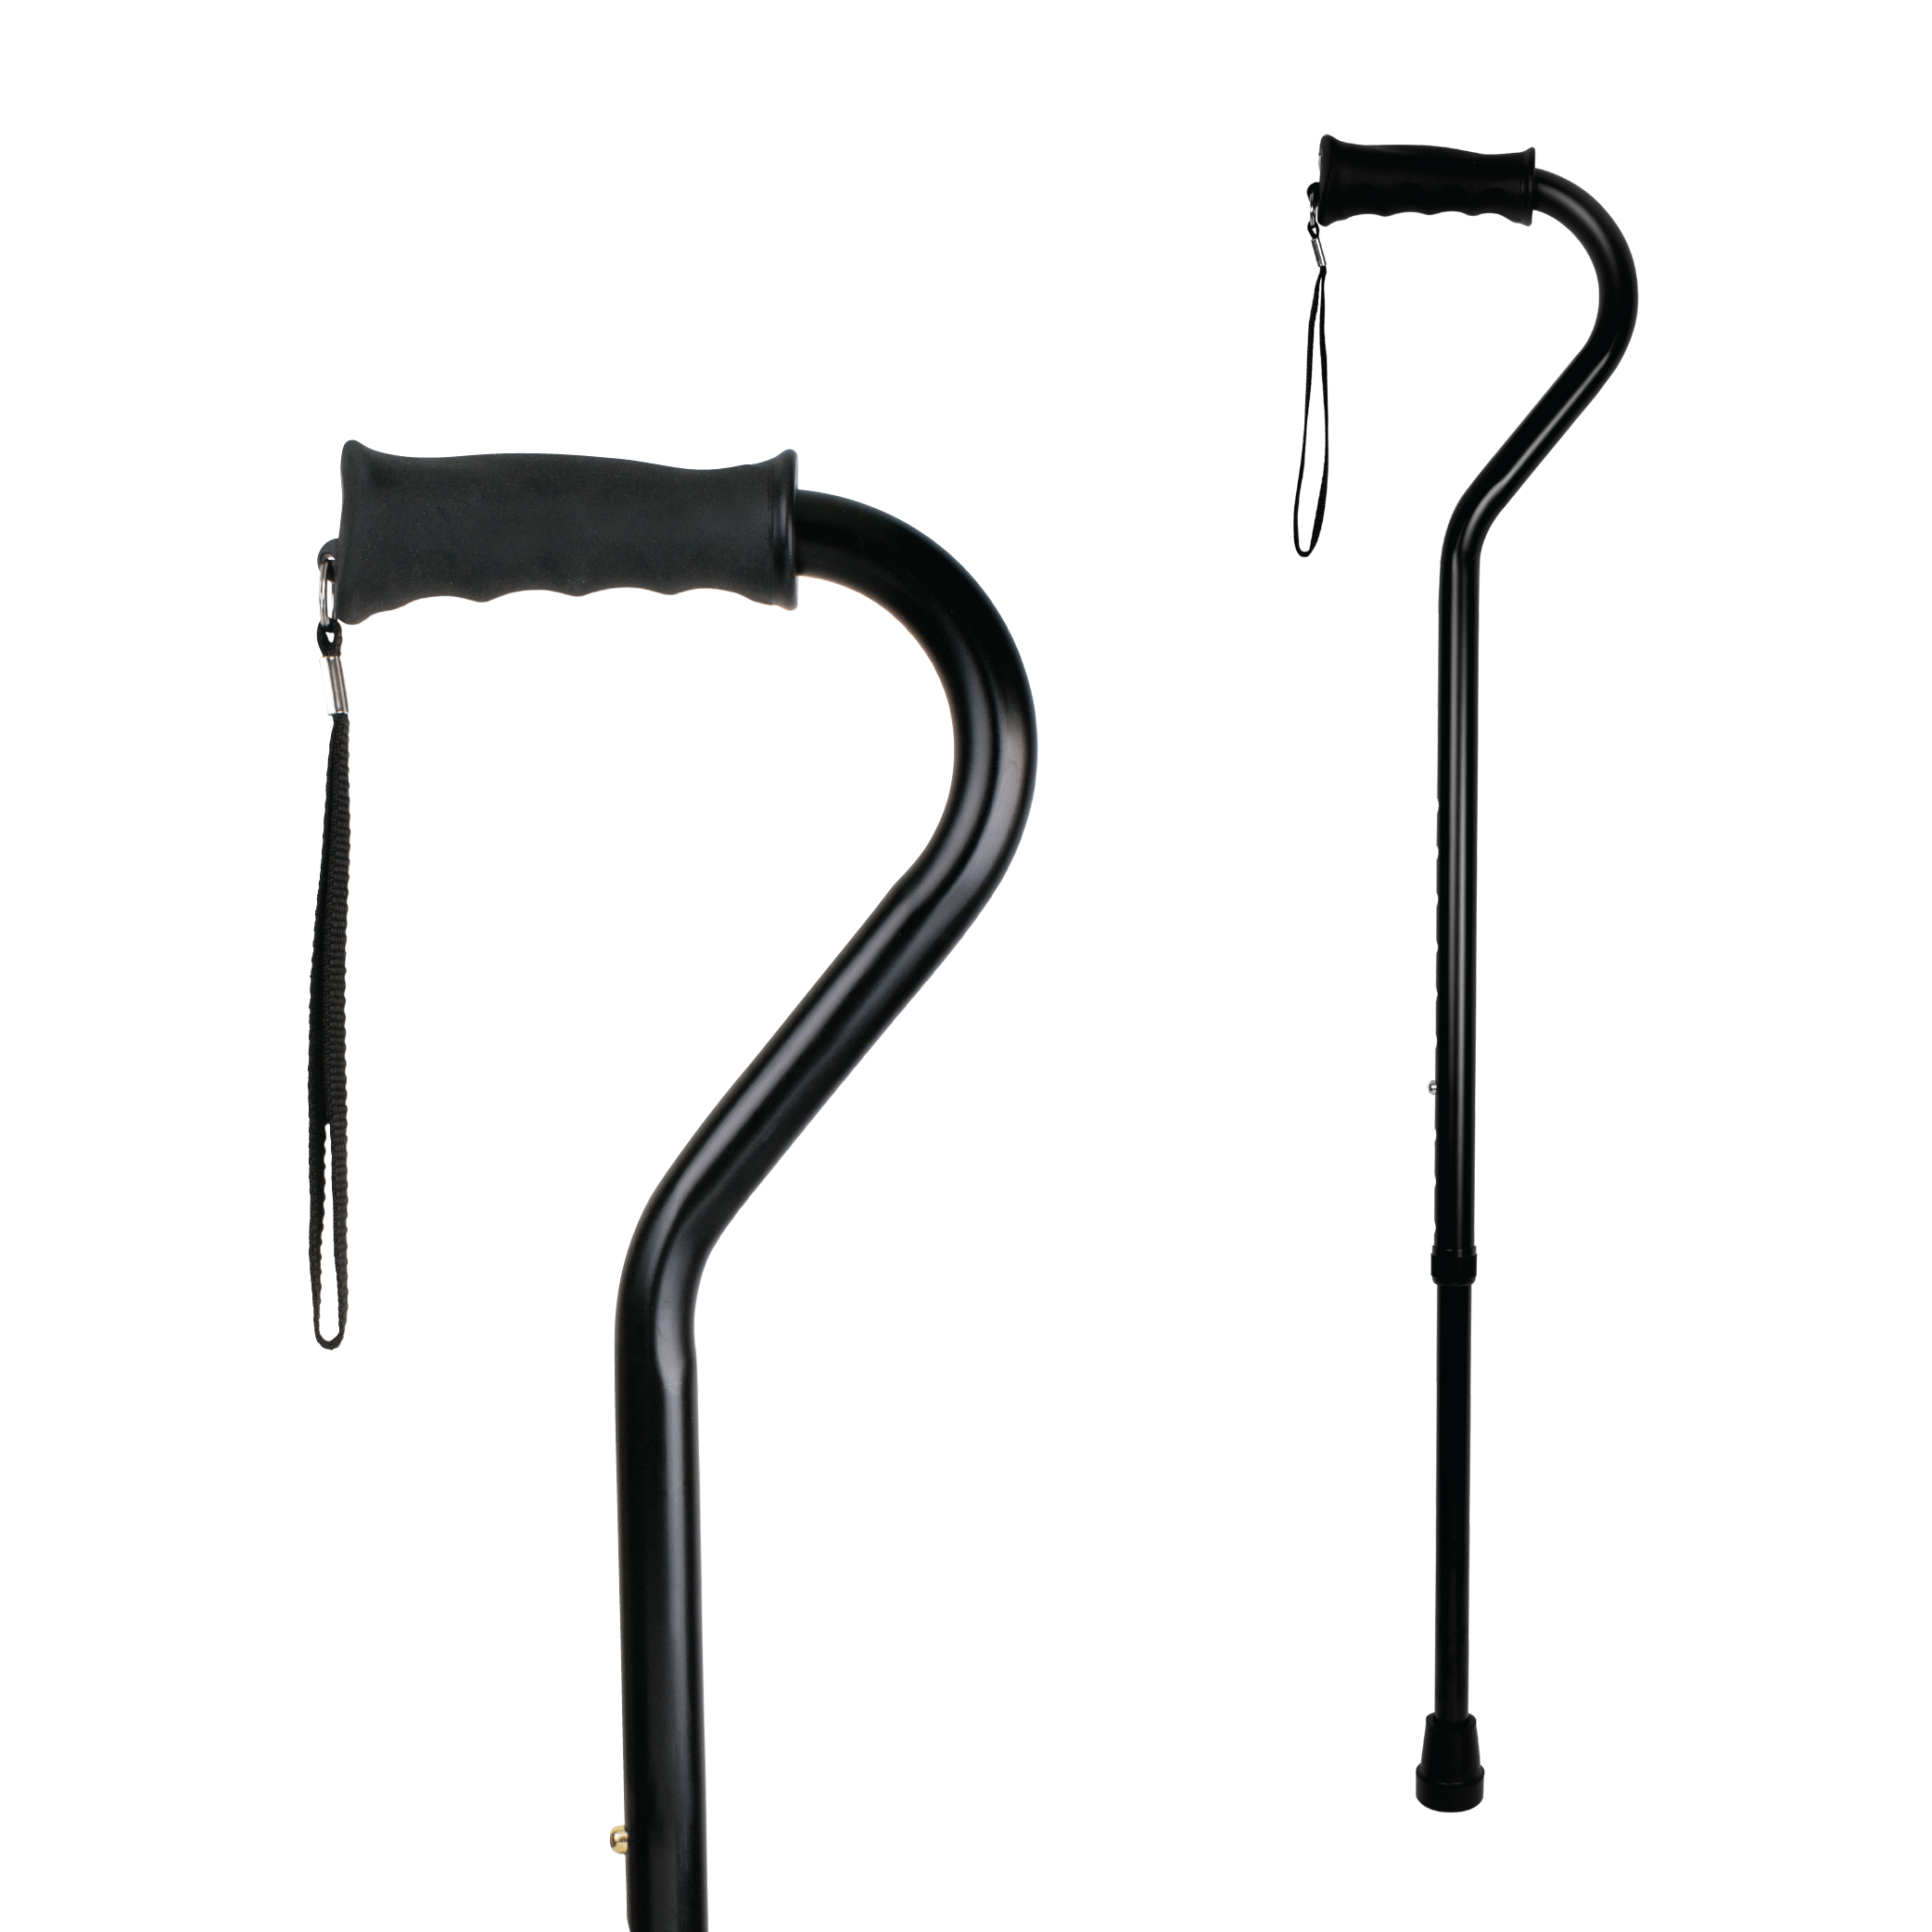 Offset Handle Fashion Canes at Meridian Medical Supply 915-351-2525